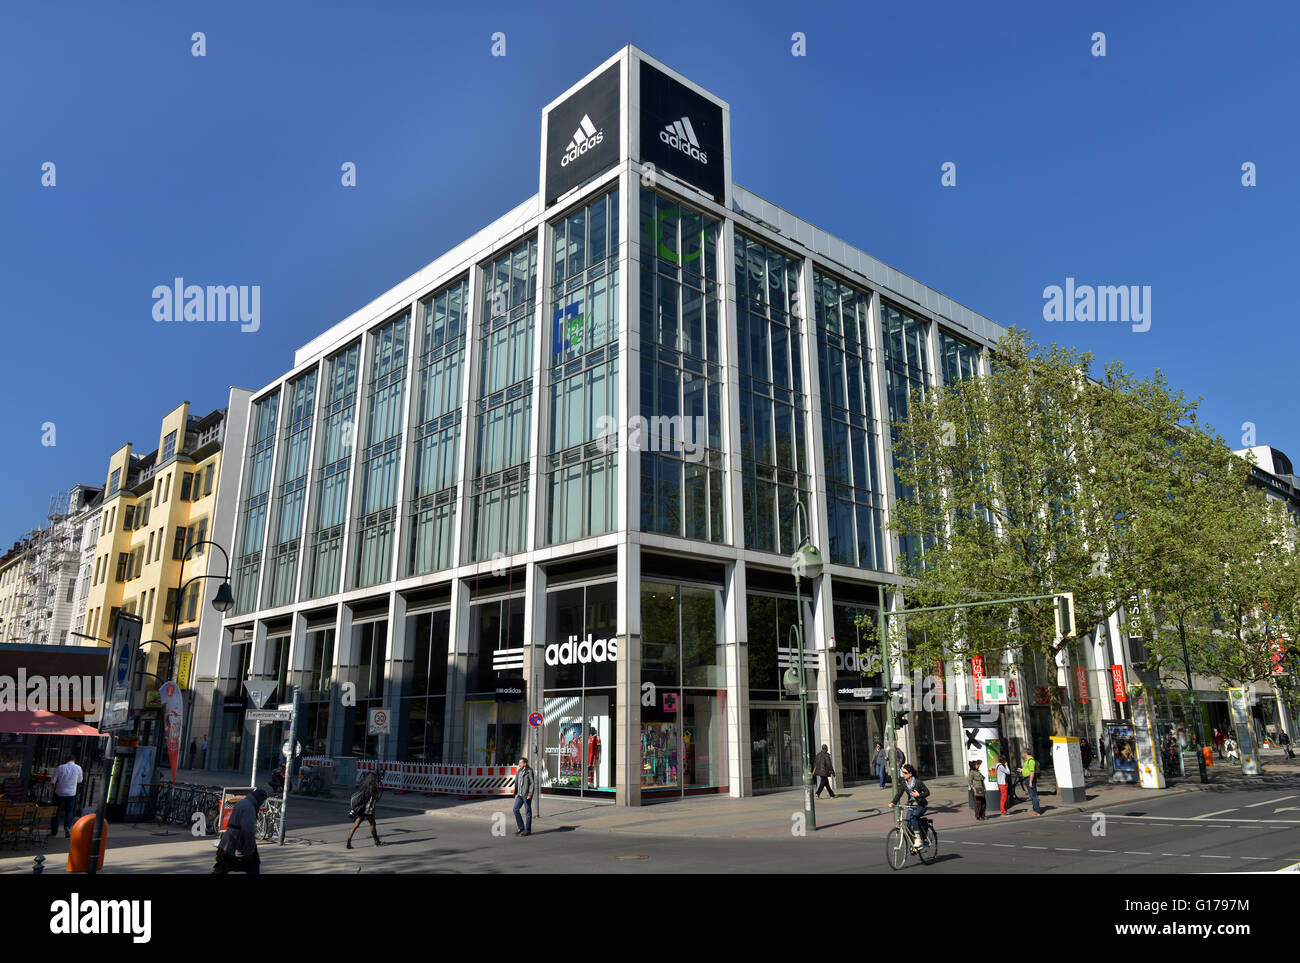 Adidas Store Berlin High Resolution Stock Photography and Images - Alamy